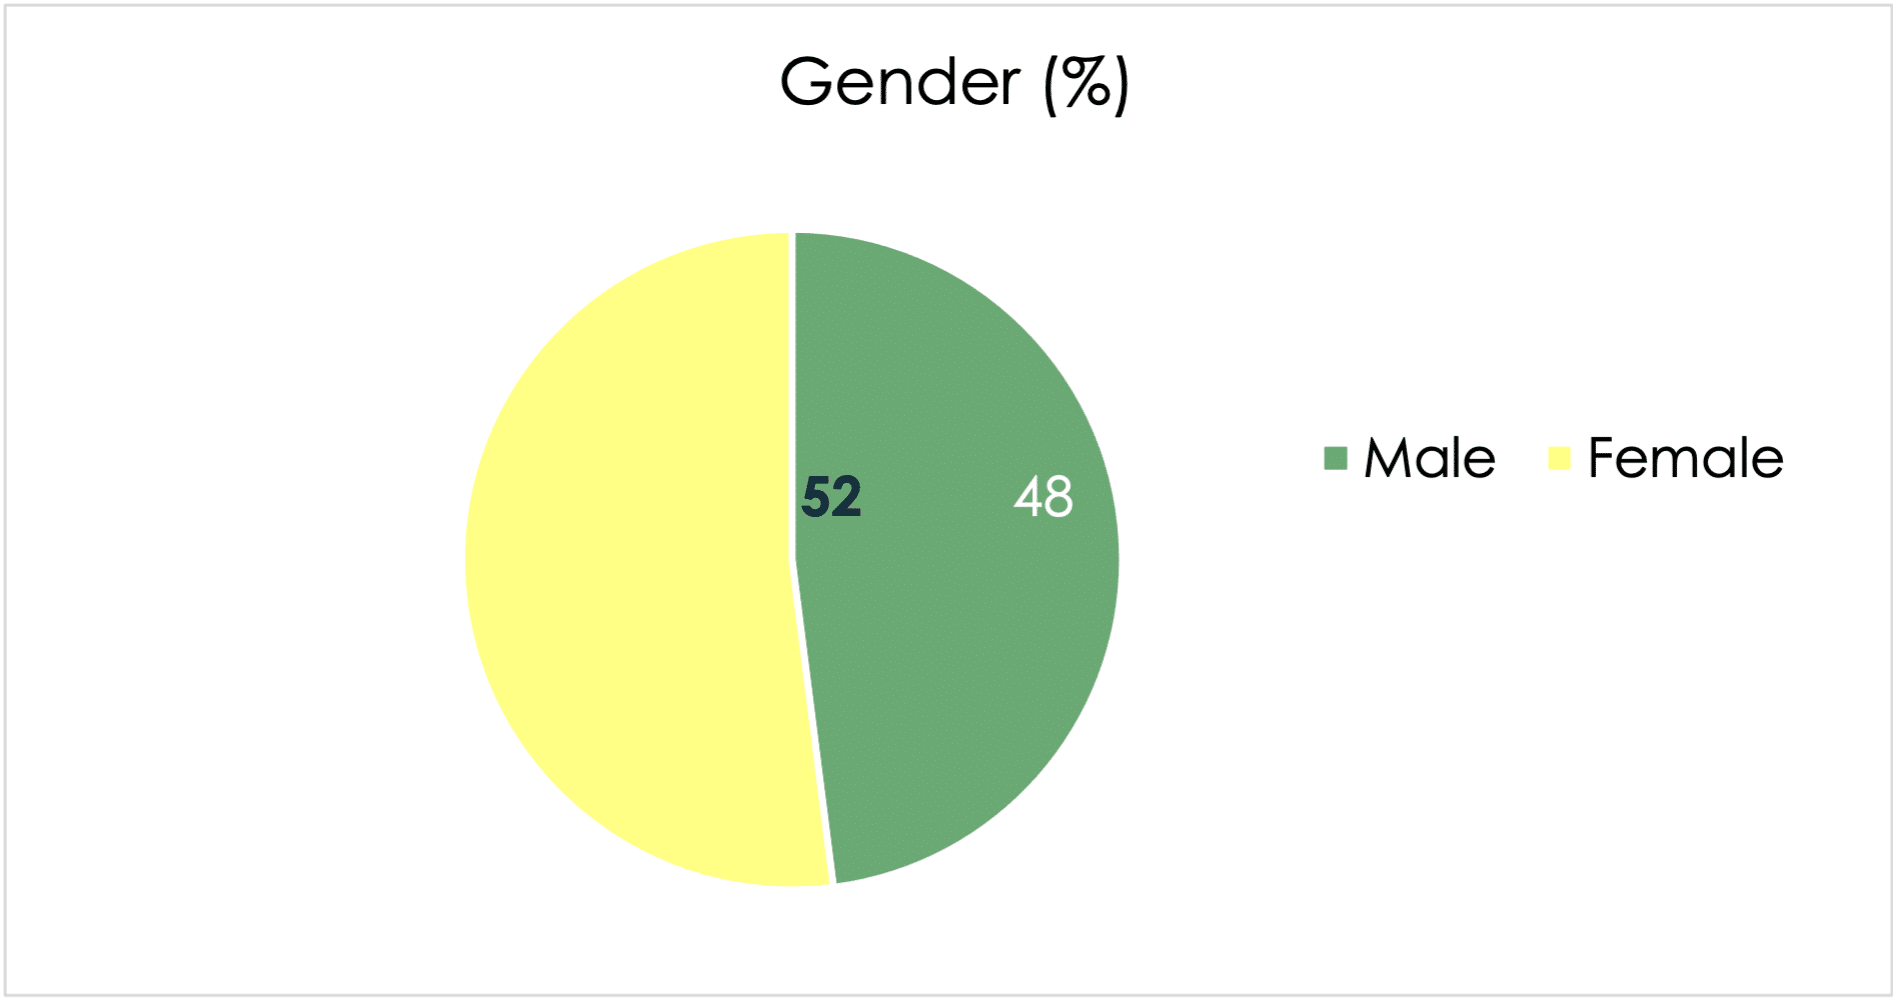 This chart shows the gender ratios of electively home educated young people are 52% female v 48% male. 